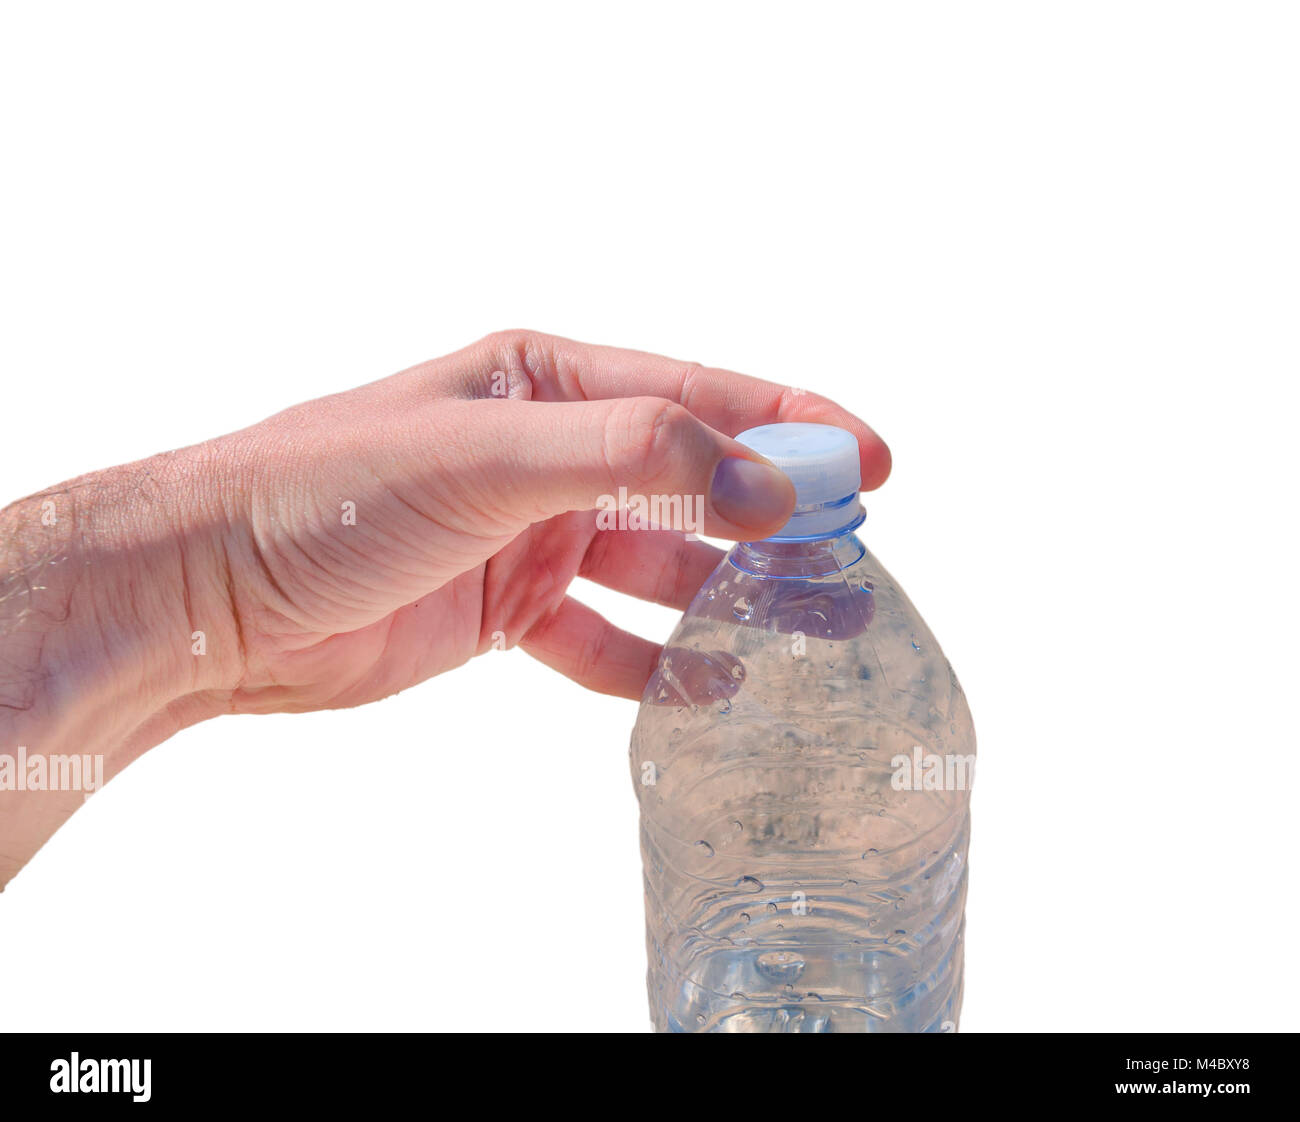 https://c8.alamy.com/comp/M4BXY8/pet-bottle-with-water-with-hand-holding-plug-isolated-on-white-M4BXY8.jpg